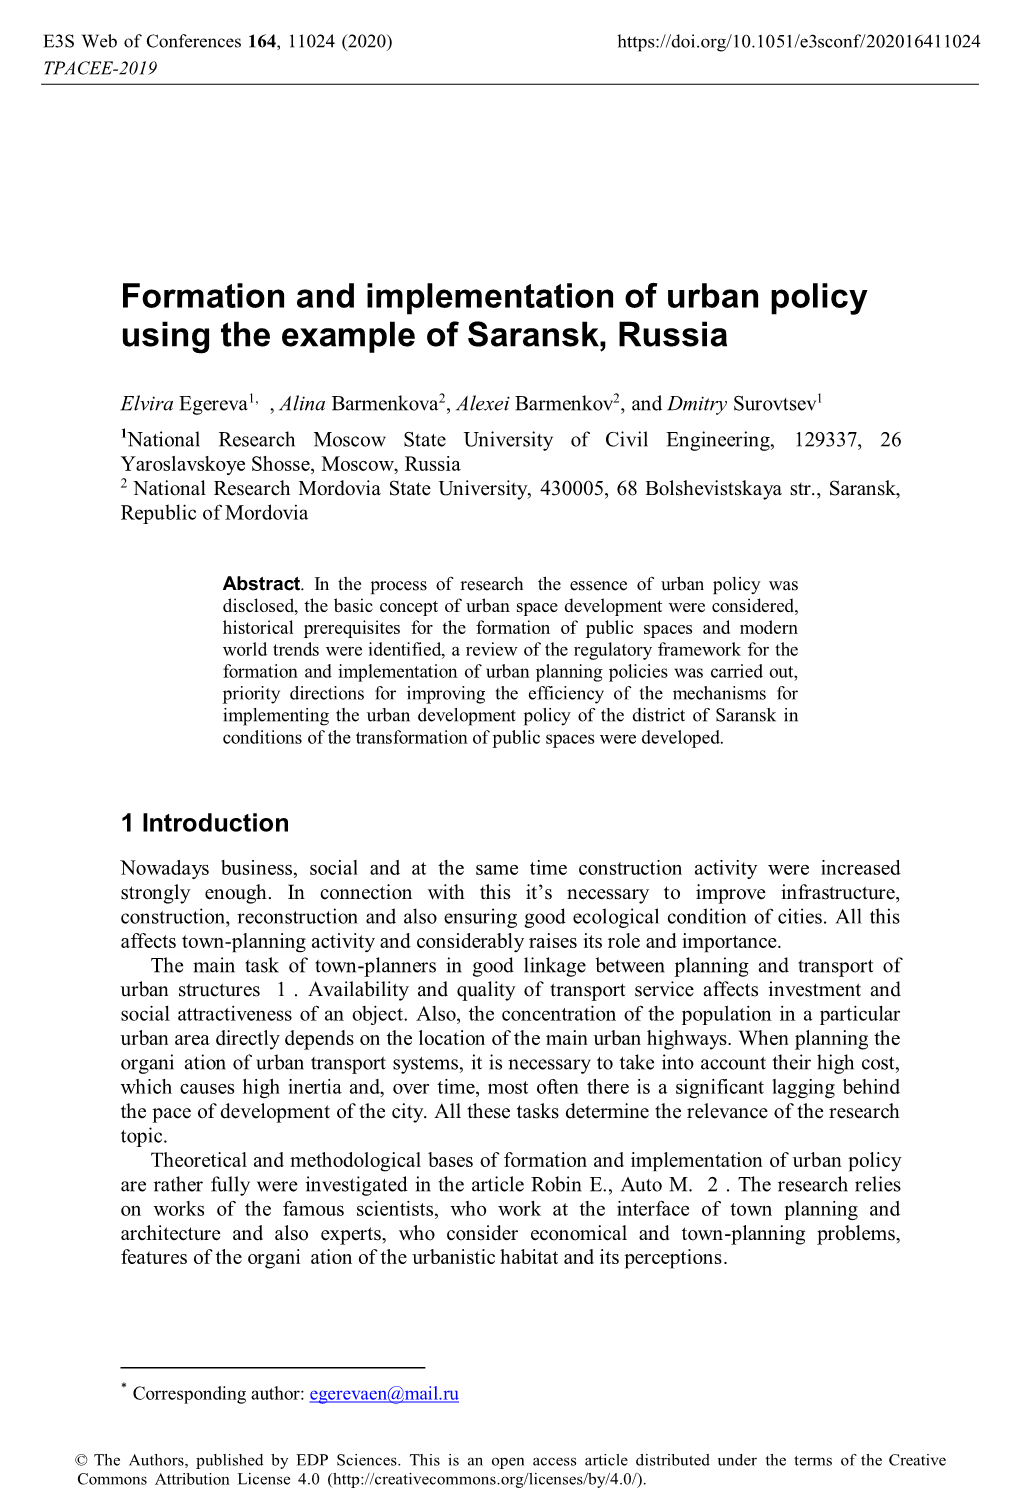 Formation and Implementation of Urban Policy Using the Example of Saransk, Russia